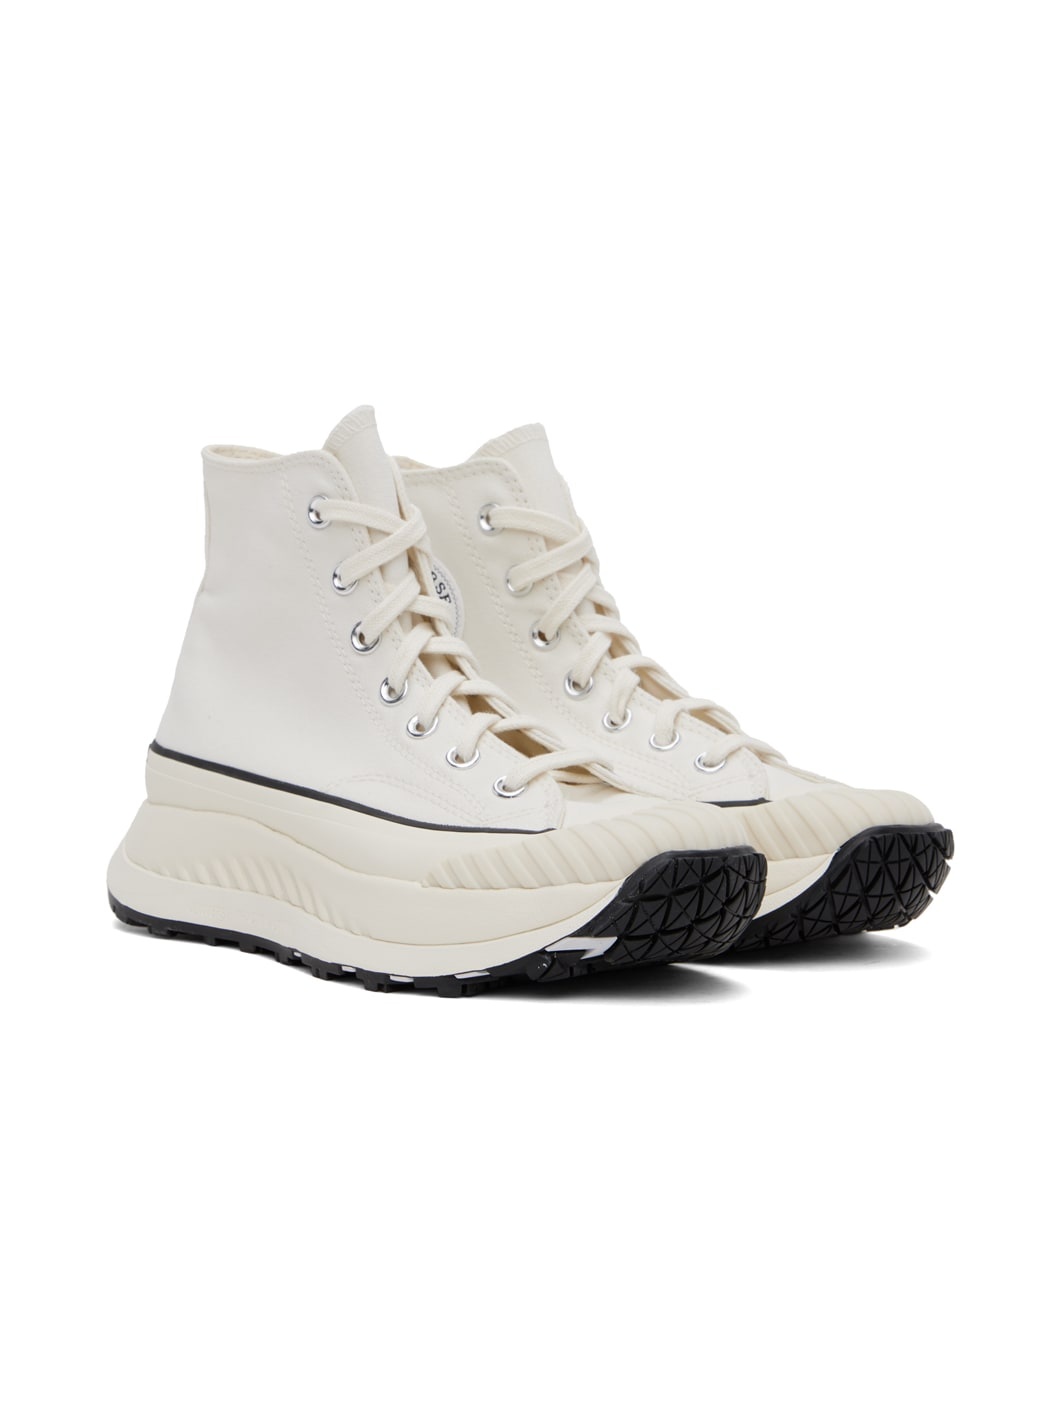 White Chuck 70 AT-CX Sneakers - 4